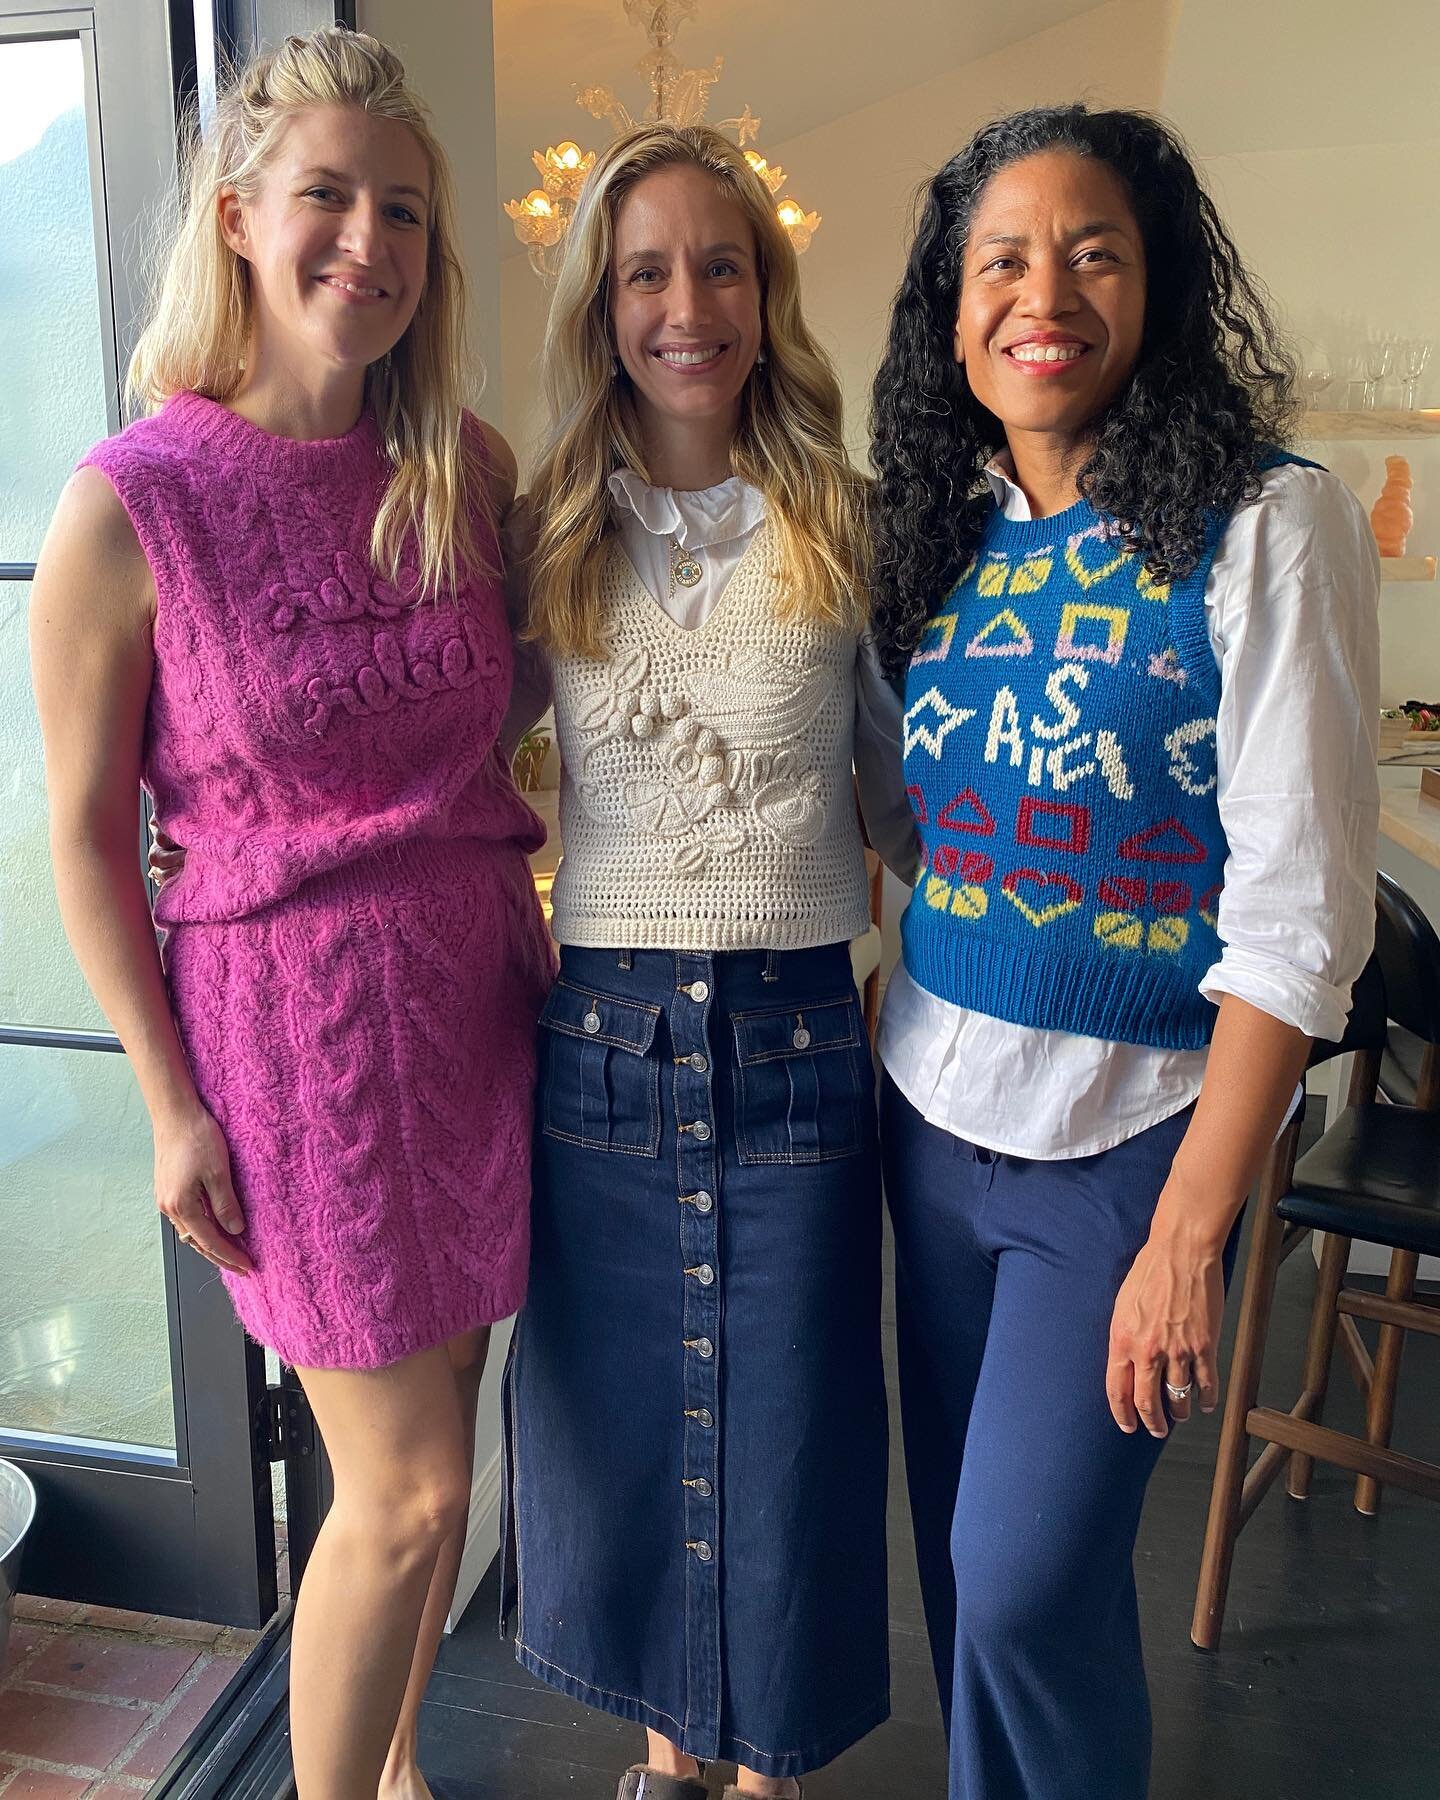 When your Mom friend turns into the next Estee Lauder, you don't just meet up for breakfast like with a normal friend. No she comes into town and I end up hosting a trunk show that was really really nice.

Hooray these ladies  @caseyfremont @rachelle